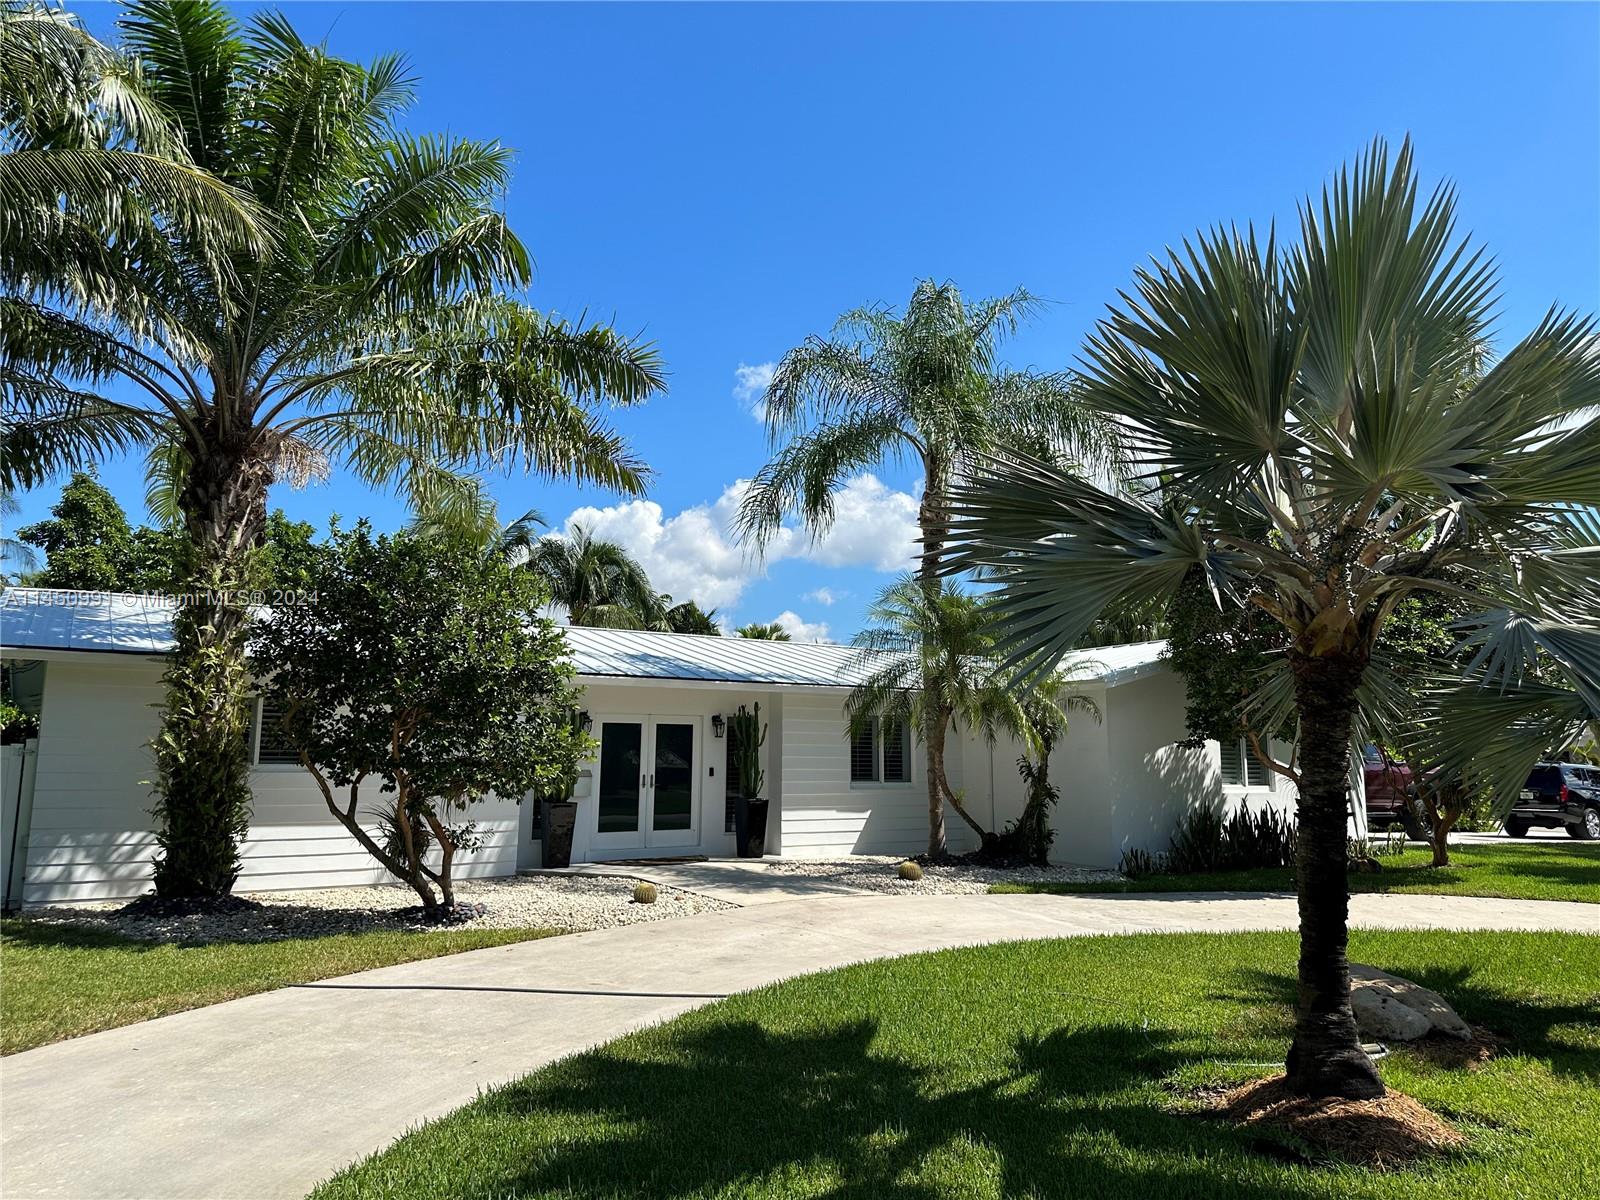 This beautiful and immaculate corner lot home in North Palmetto Bay has been updated with all impact windows and doors. Also, a new metal roof was installed in 2016. This home is situated in a very quite, and peaceful corner with amazing curb appeal and lots of privacy to enjoy your back yard and beautiful pool. Very close to Coral Reef Park, and school. New Kitchen appliances, fairly new washer and dryer, and both A/C compressors are relatively new as well. You are also close to great schools, both private and public. Close by you have the world renowned Lifetime Gym and fantastic dining as well. Come see this home and make it your own.